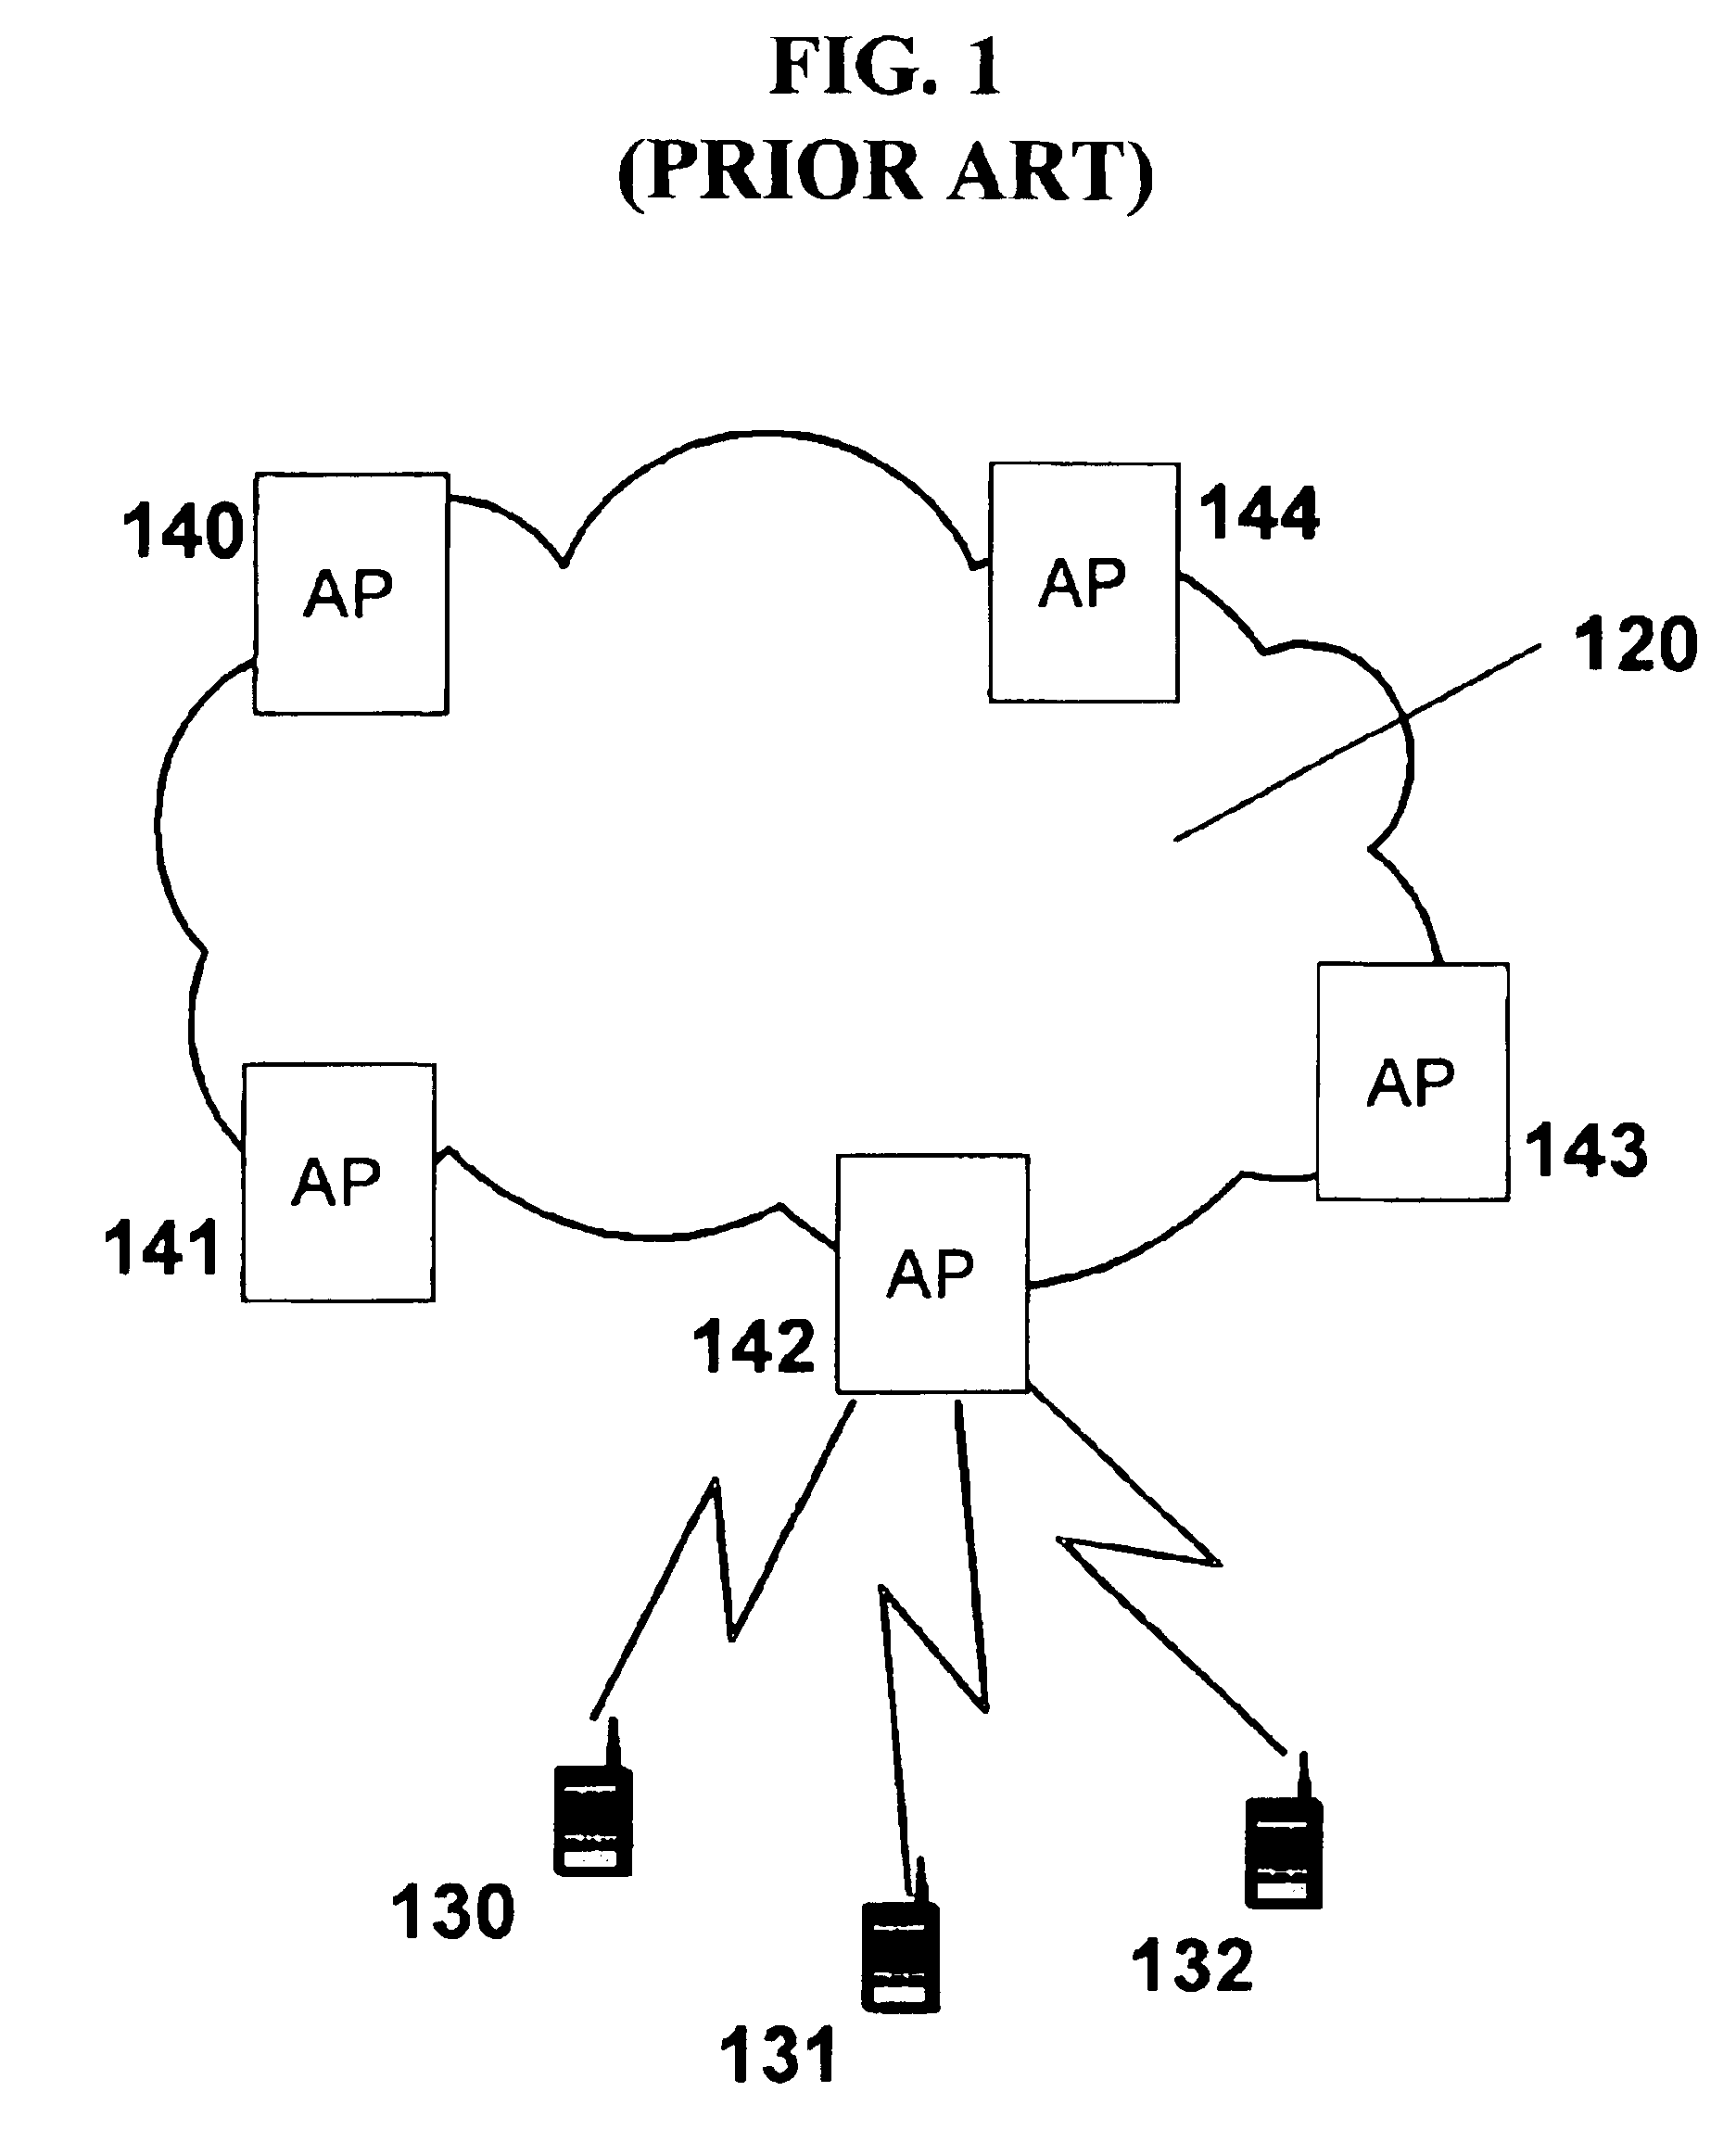 Extension mechanism and technique for enabling low-power end devices to access remote networks using short-range wireless communications means